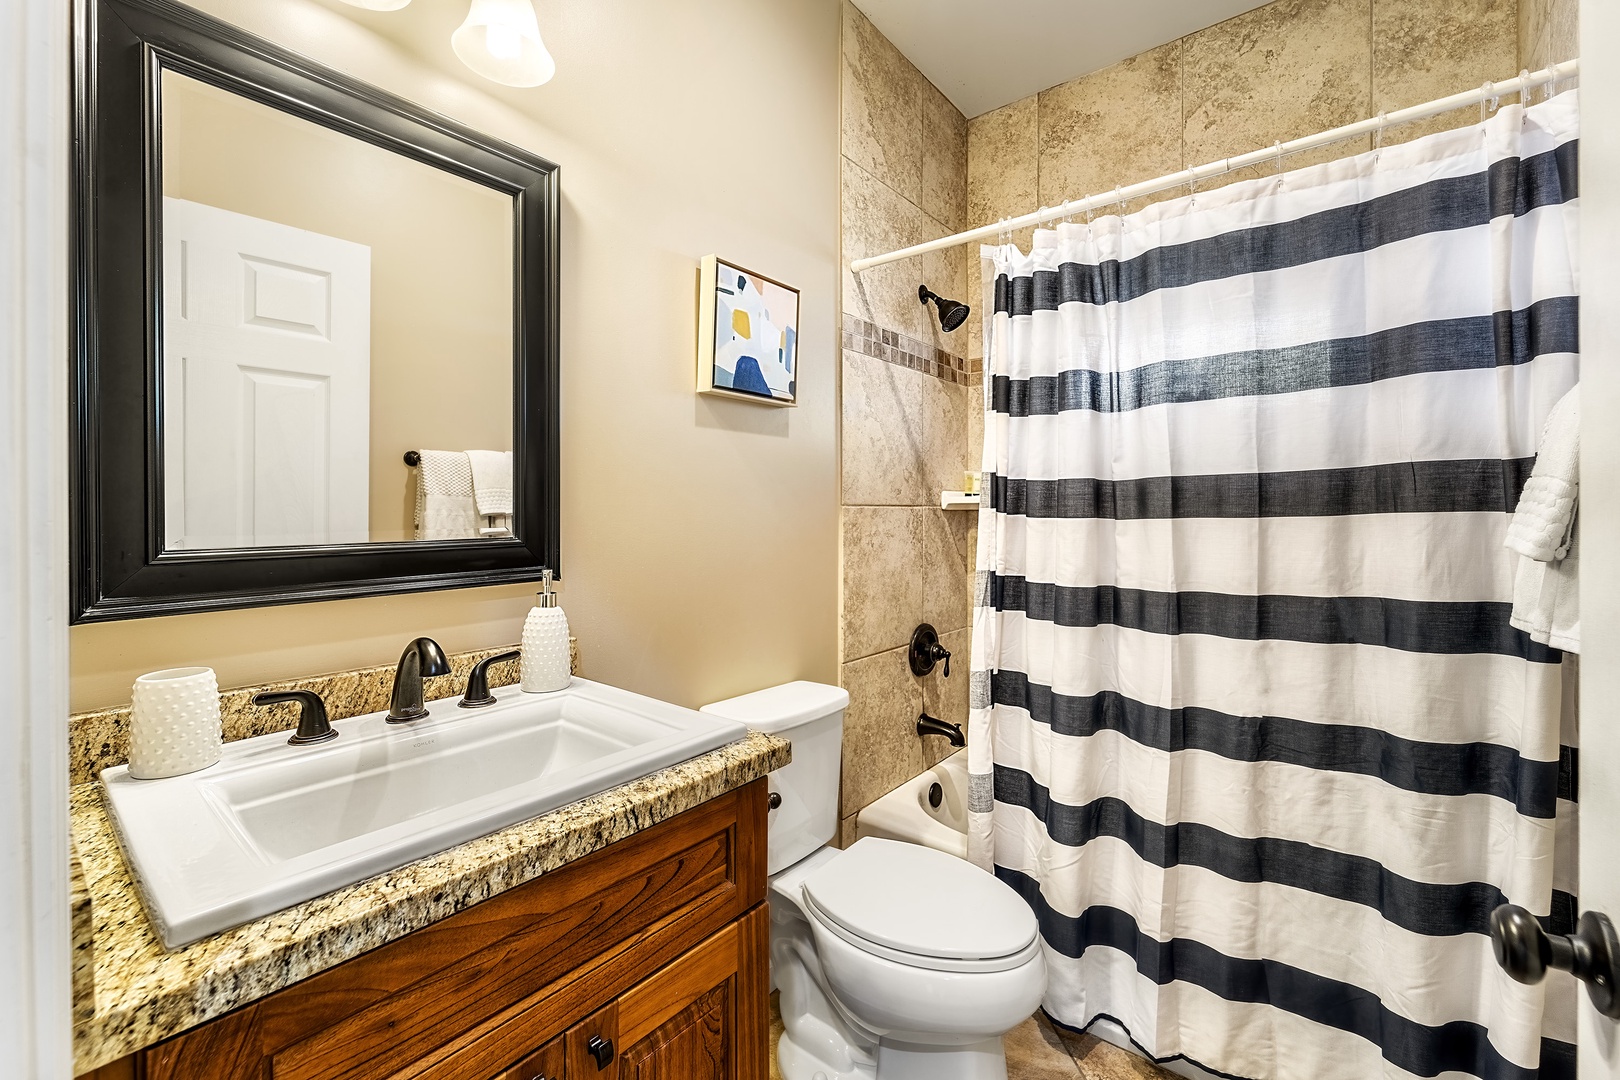 Kailua Kona Vacation Rentals, Lymans Bay Hale - Downstairs guest bathroom with tub/shower combo